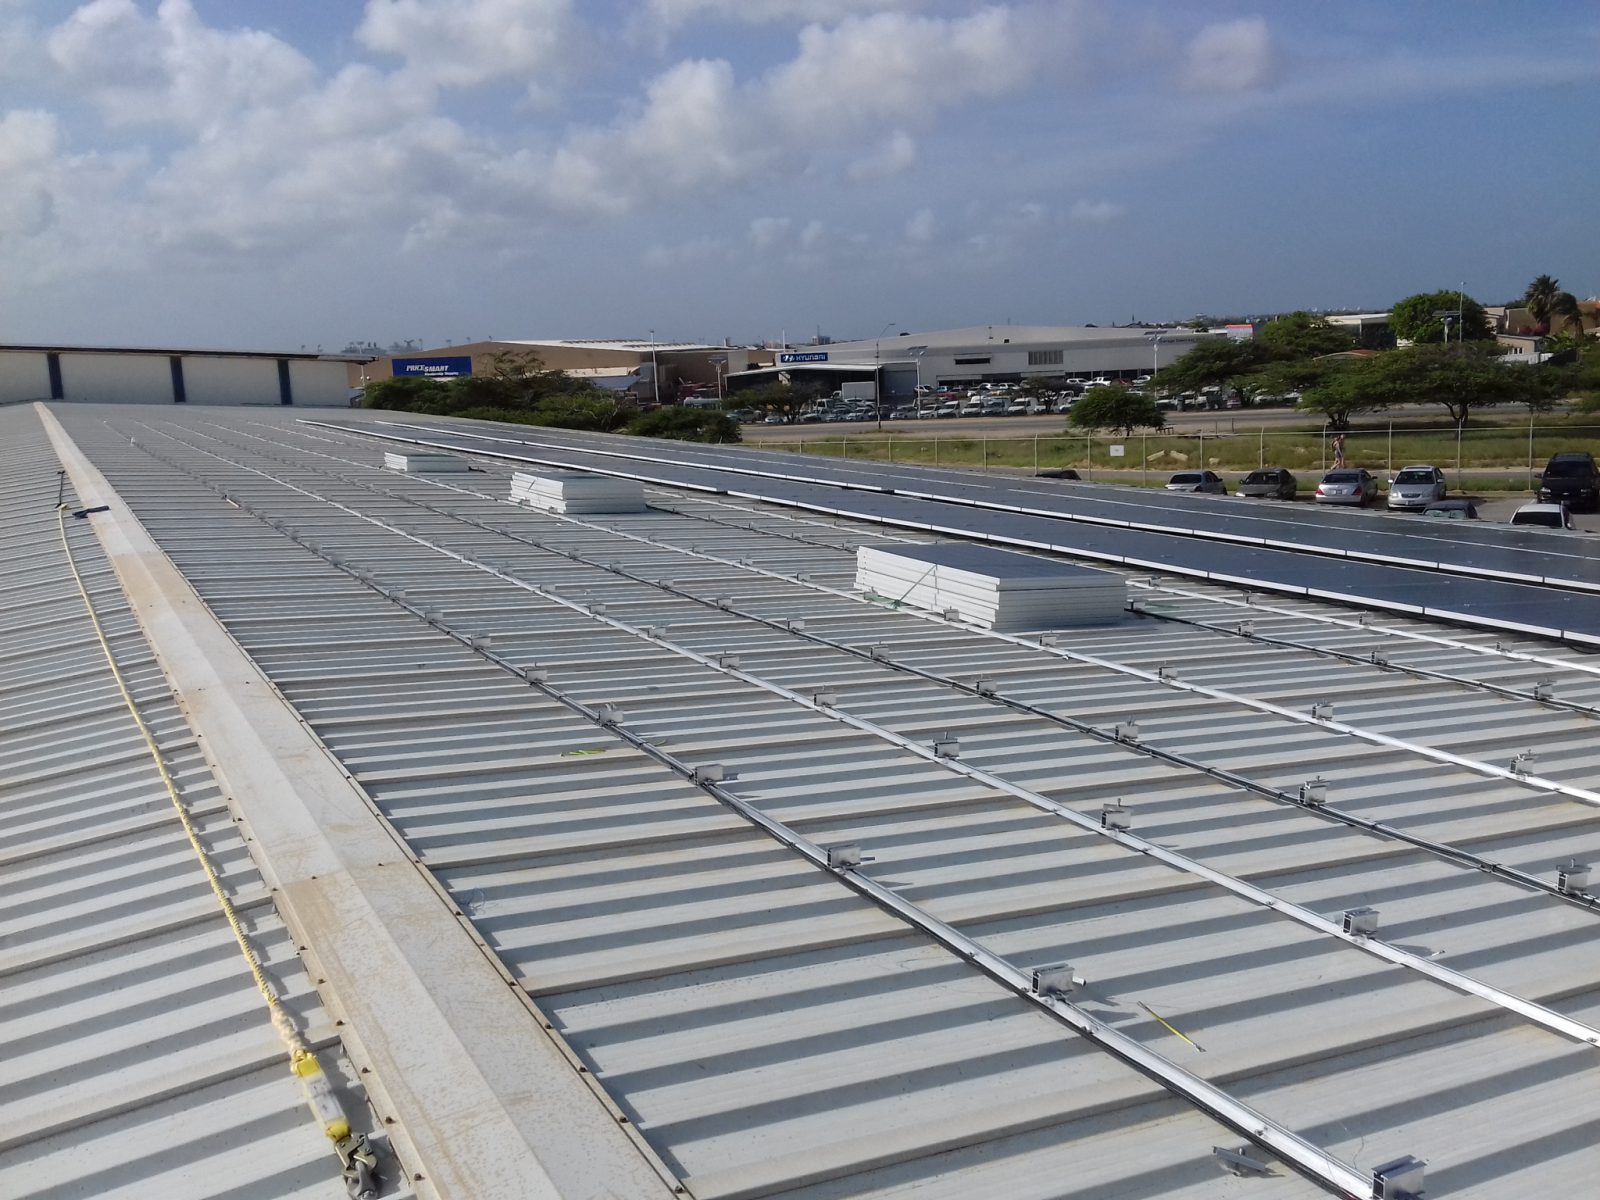 Photovoltaic rooftop project carried of 420kW